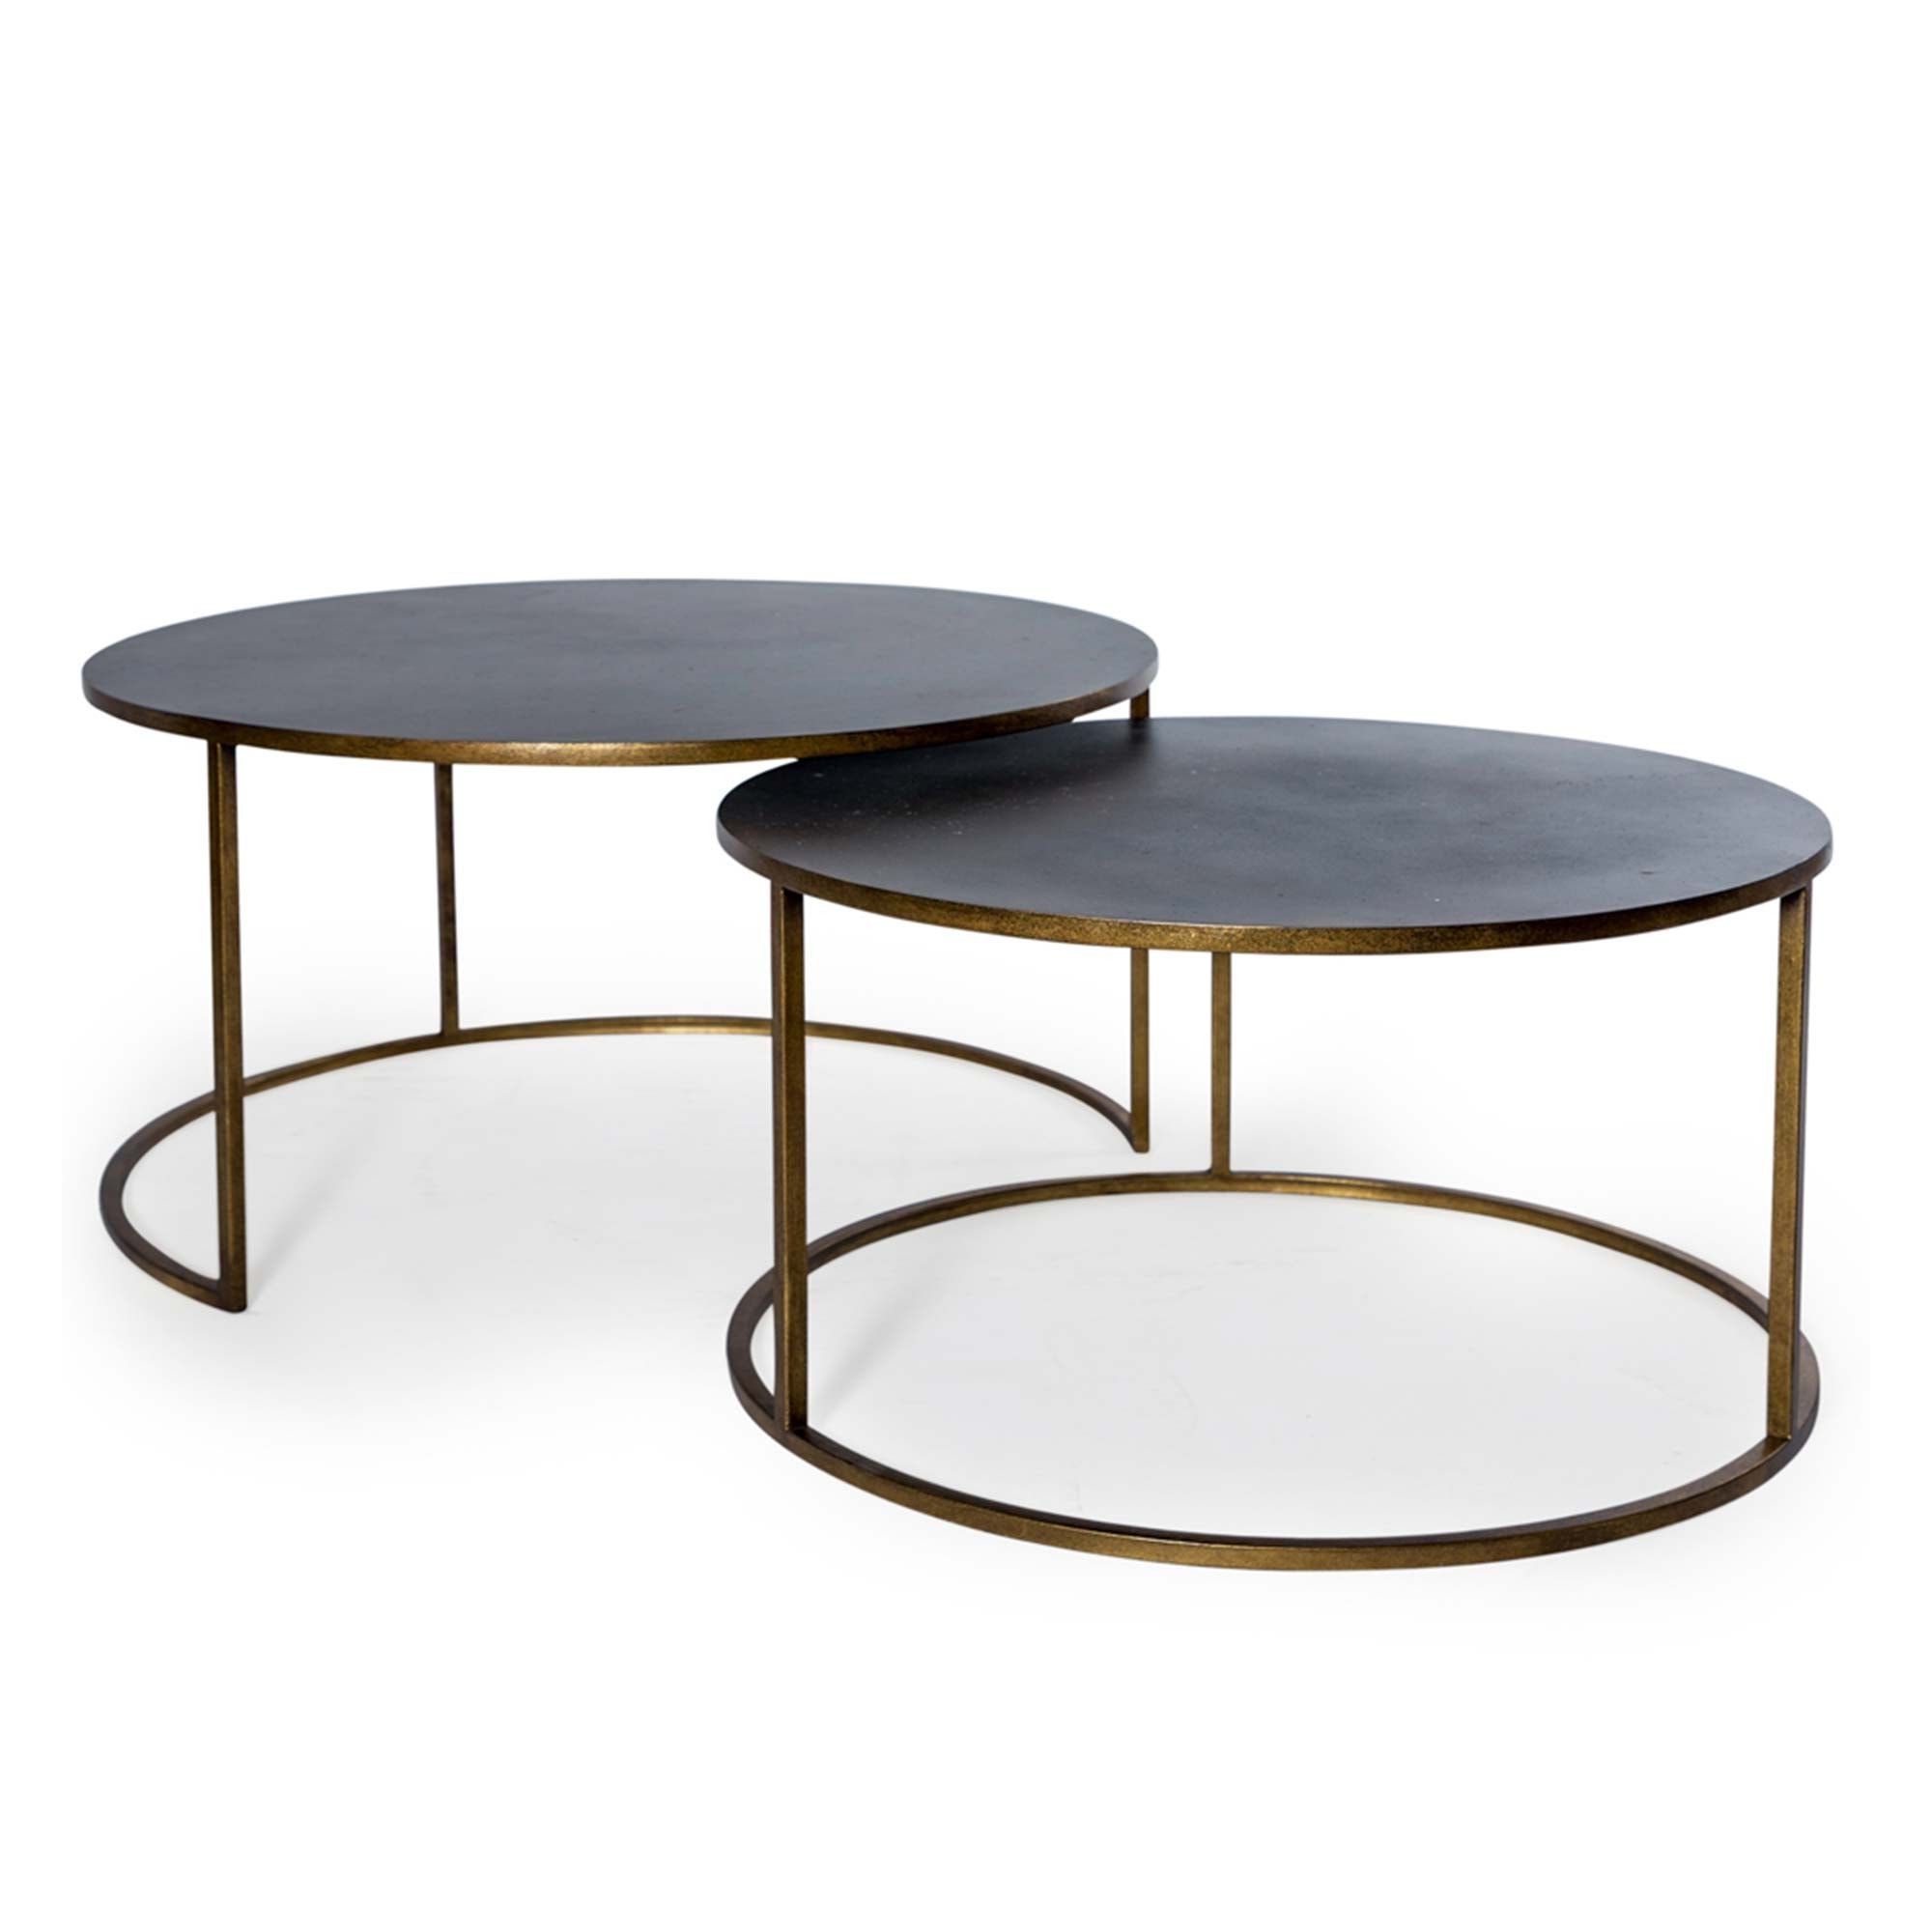 Well Known Bronze Metal Coffee Tables In Nest Of 2 Antique Gold And Bronze Metal Coffee Tables (View 11 of 20)